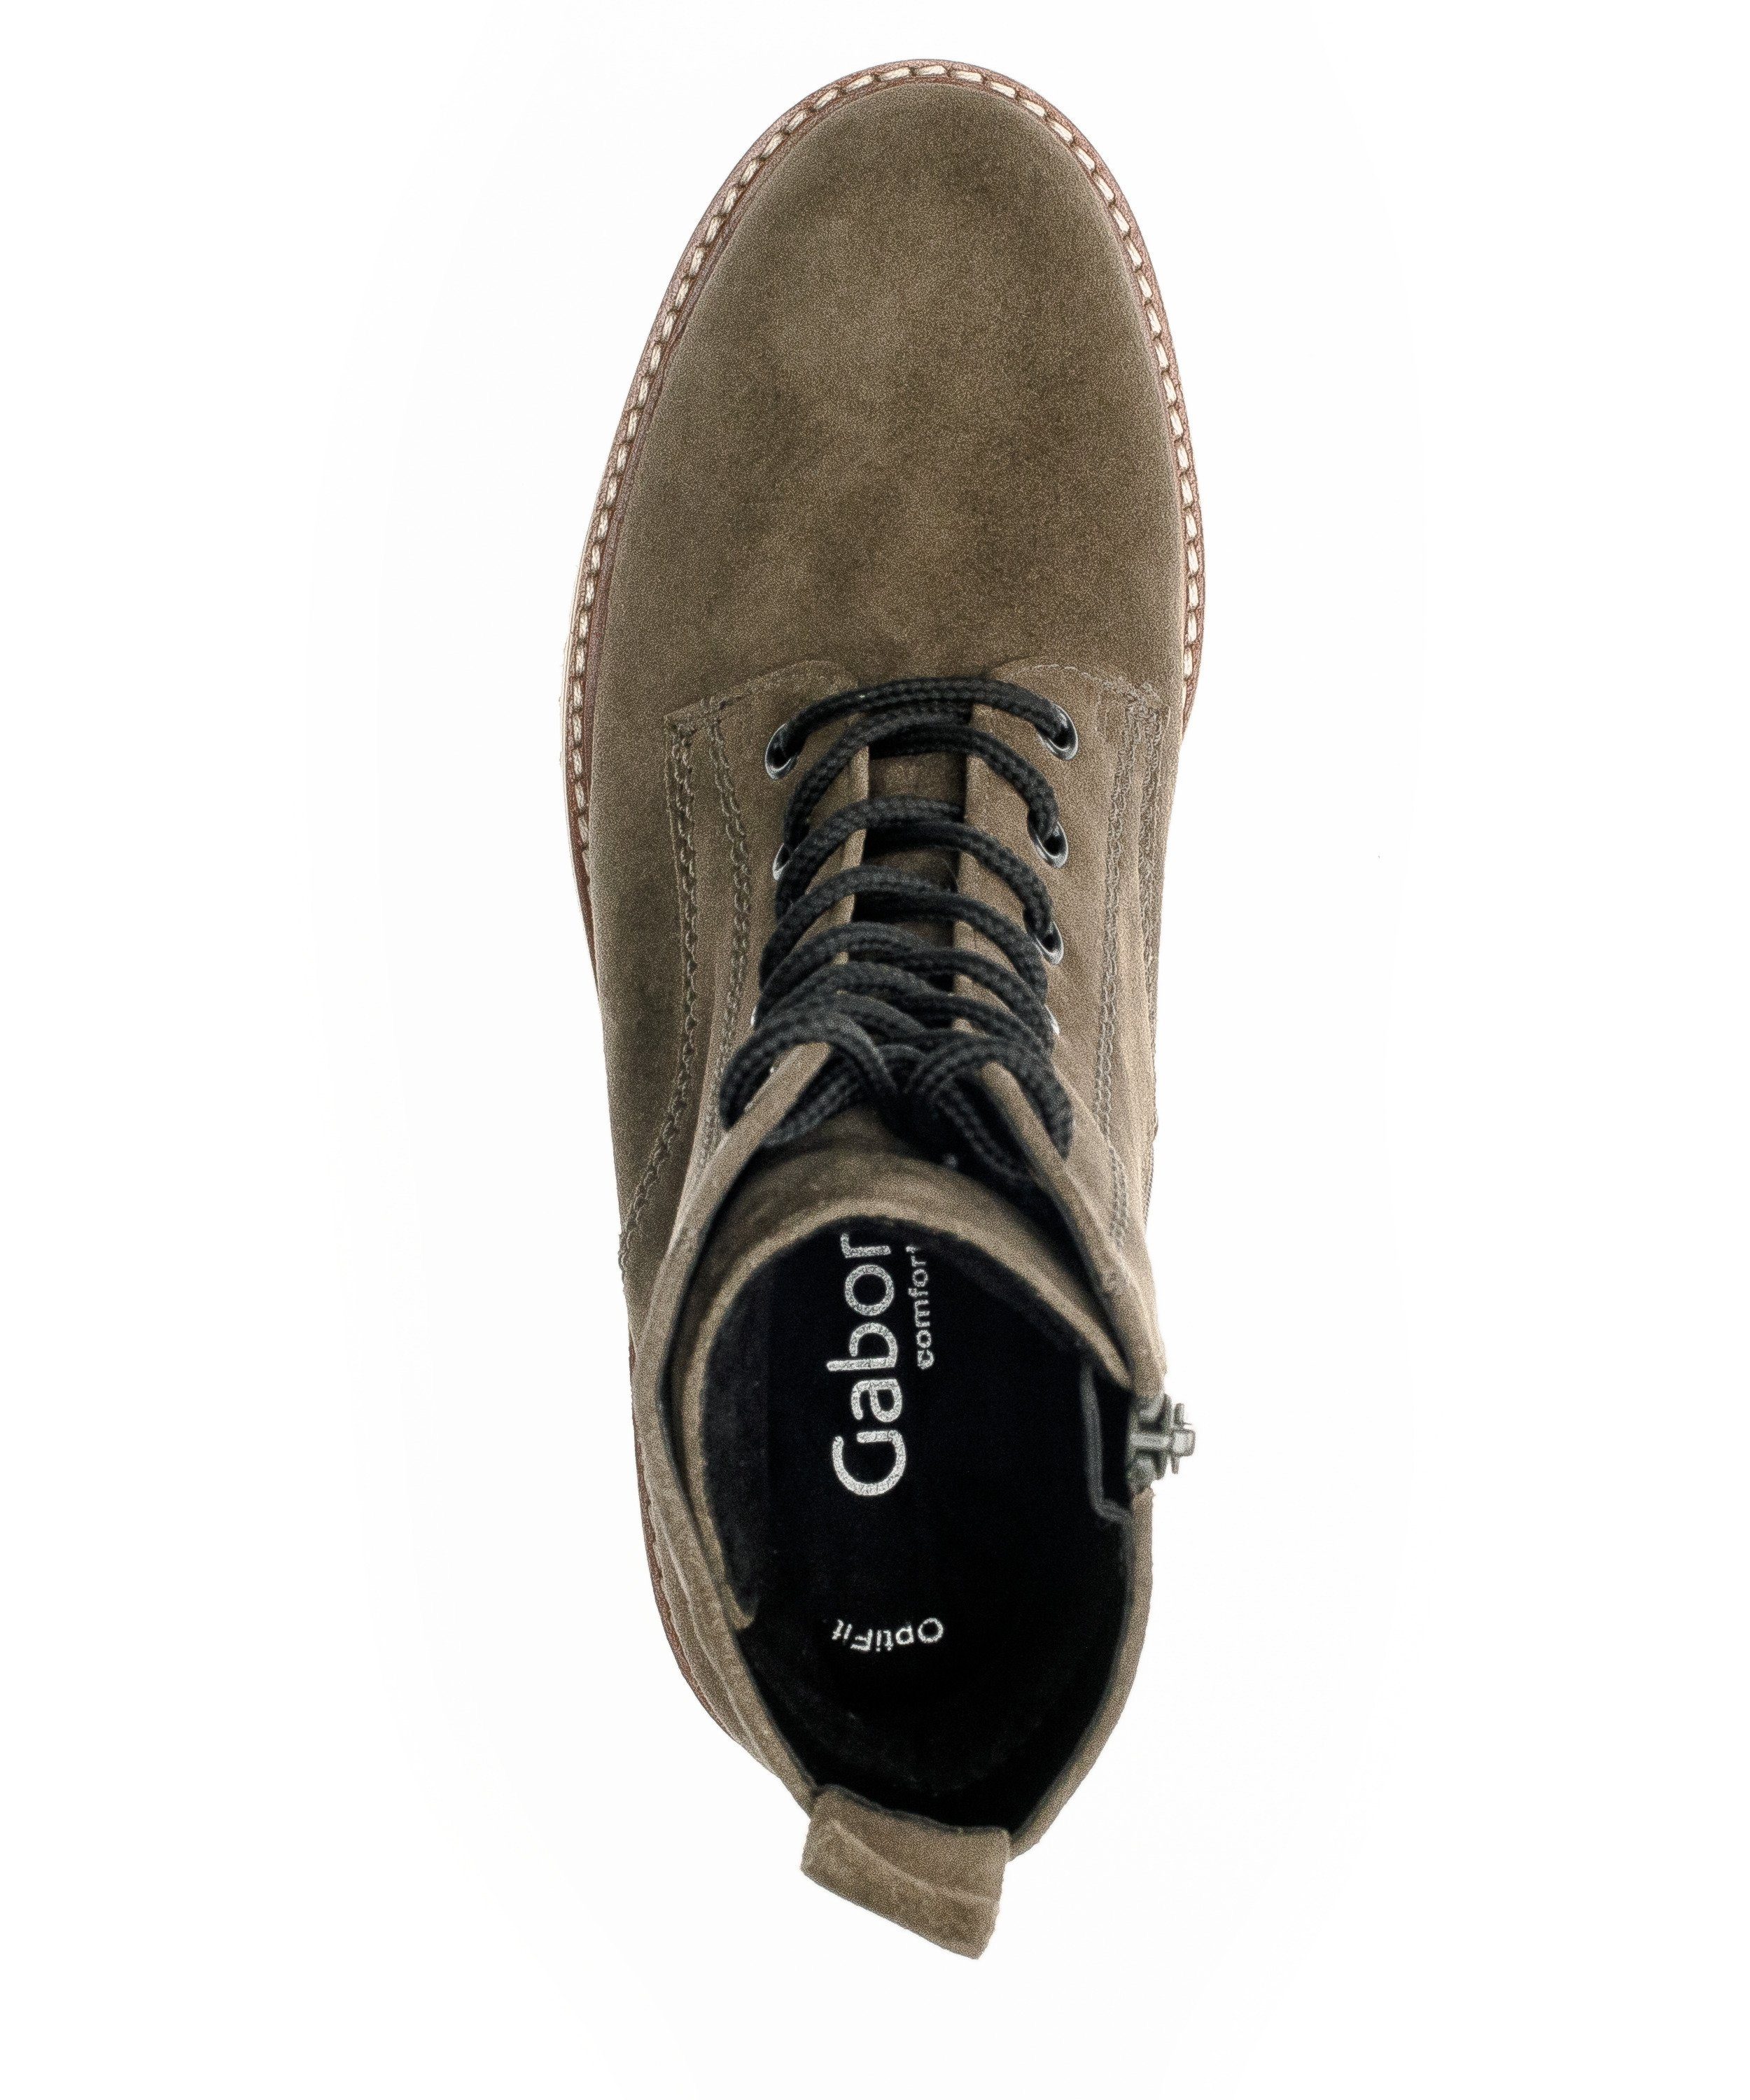 Gabor Comfort Chelseaboots oliv (Micro)